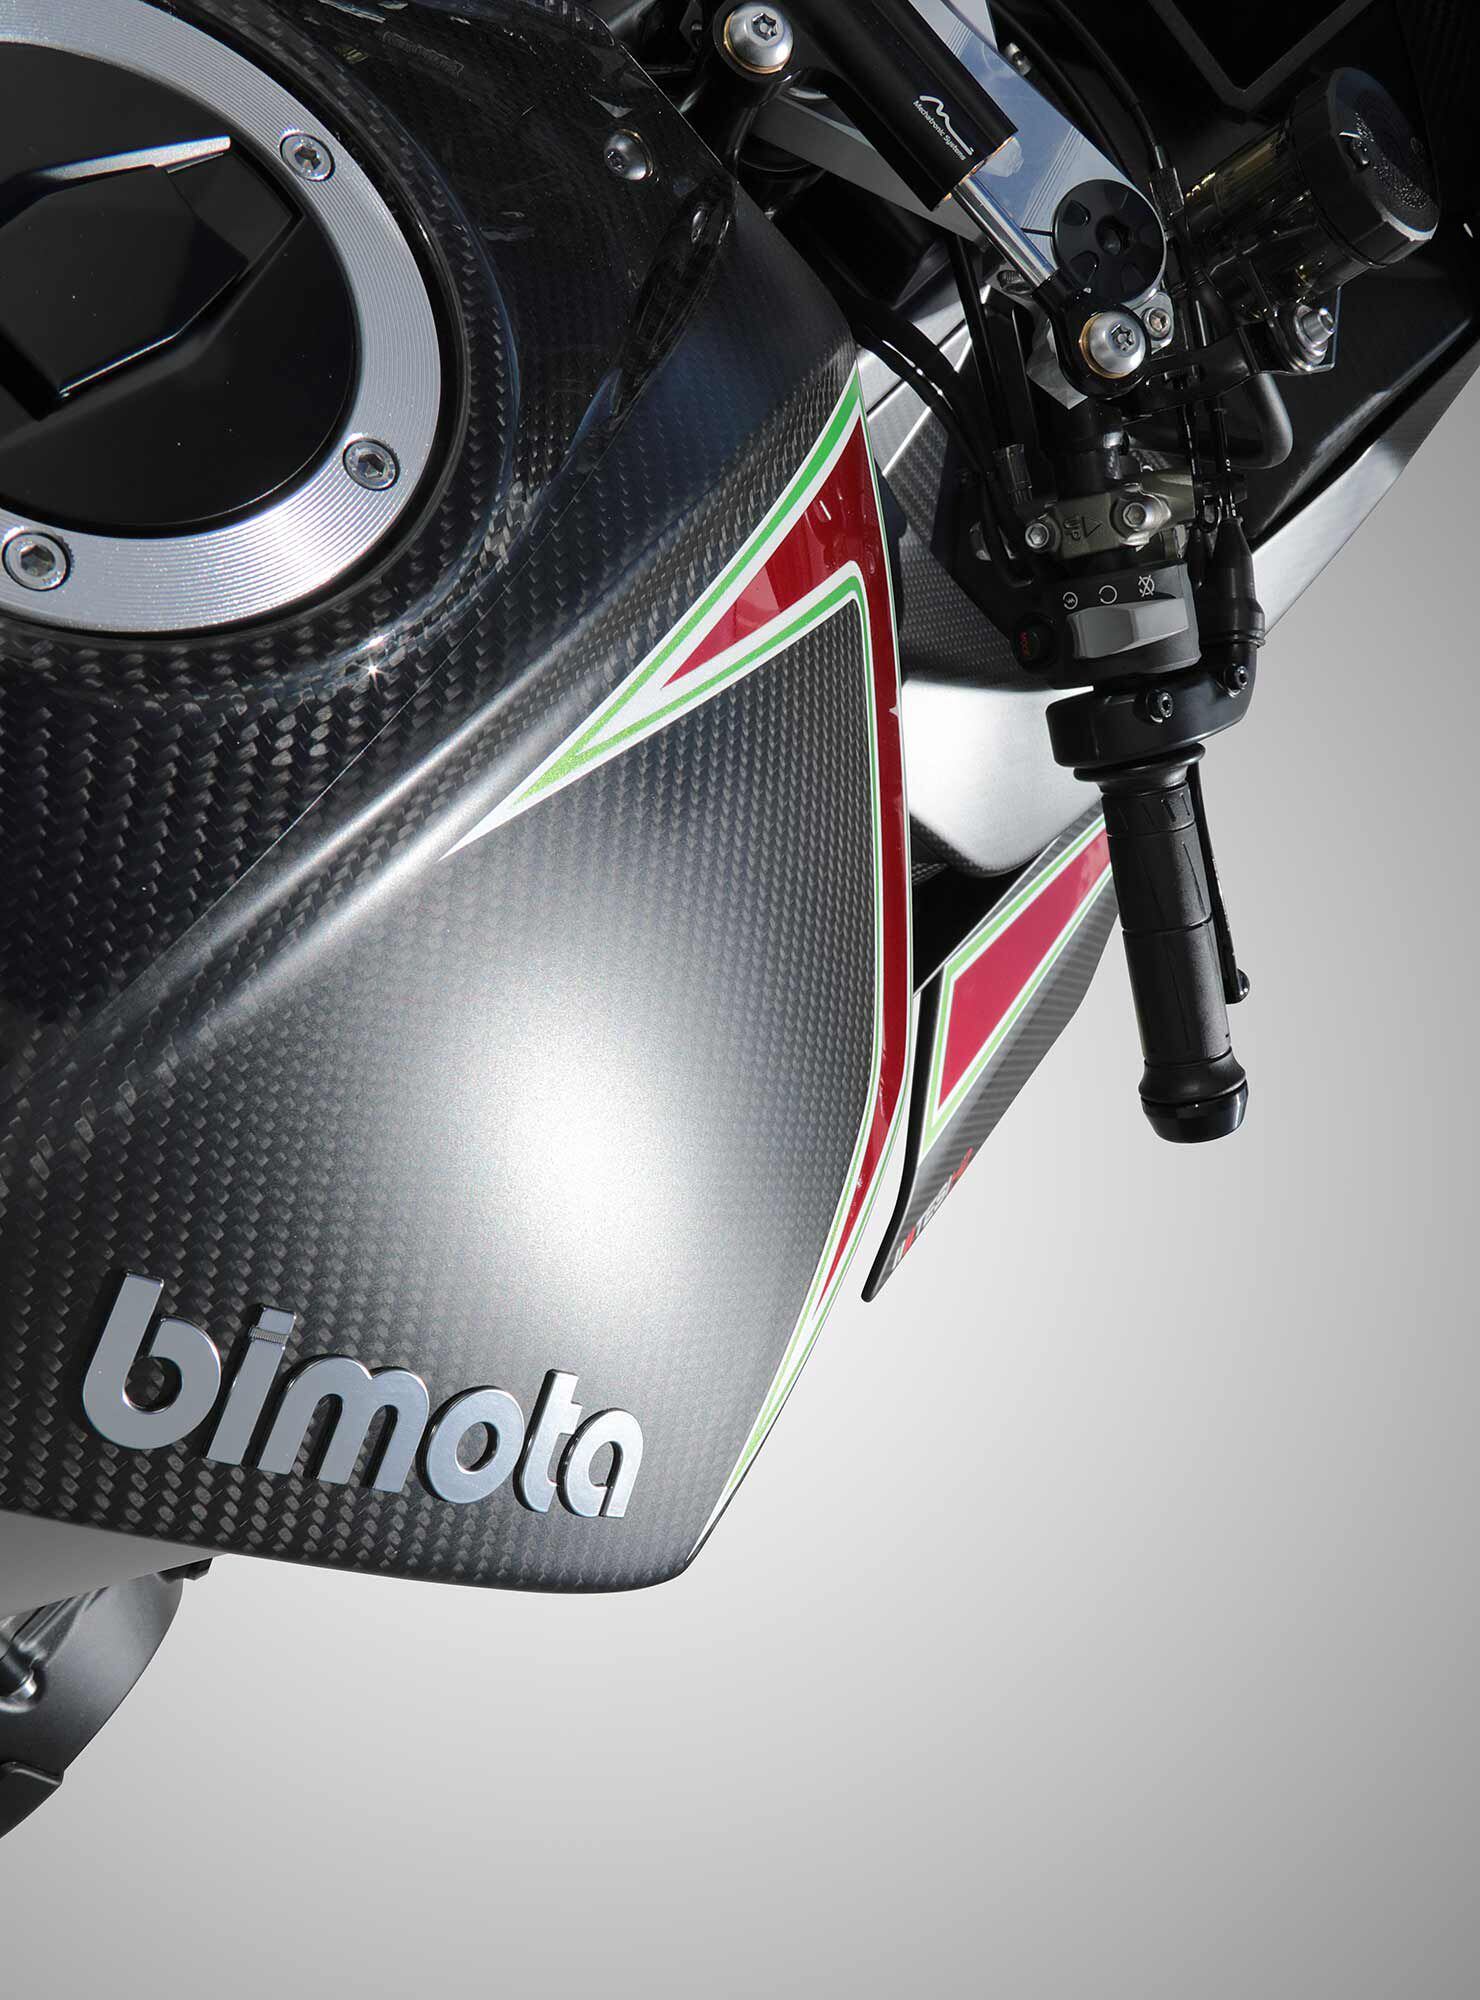 Twist quickly to blur the world: the view aboard the Bimota Tesi H2.